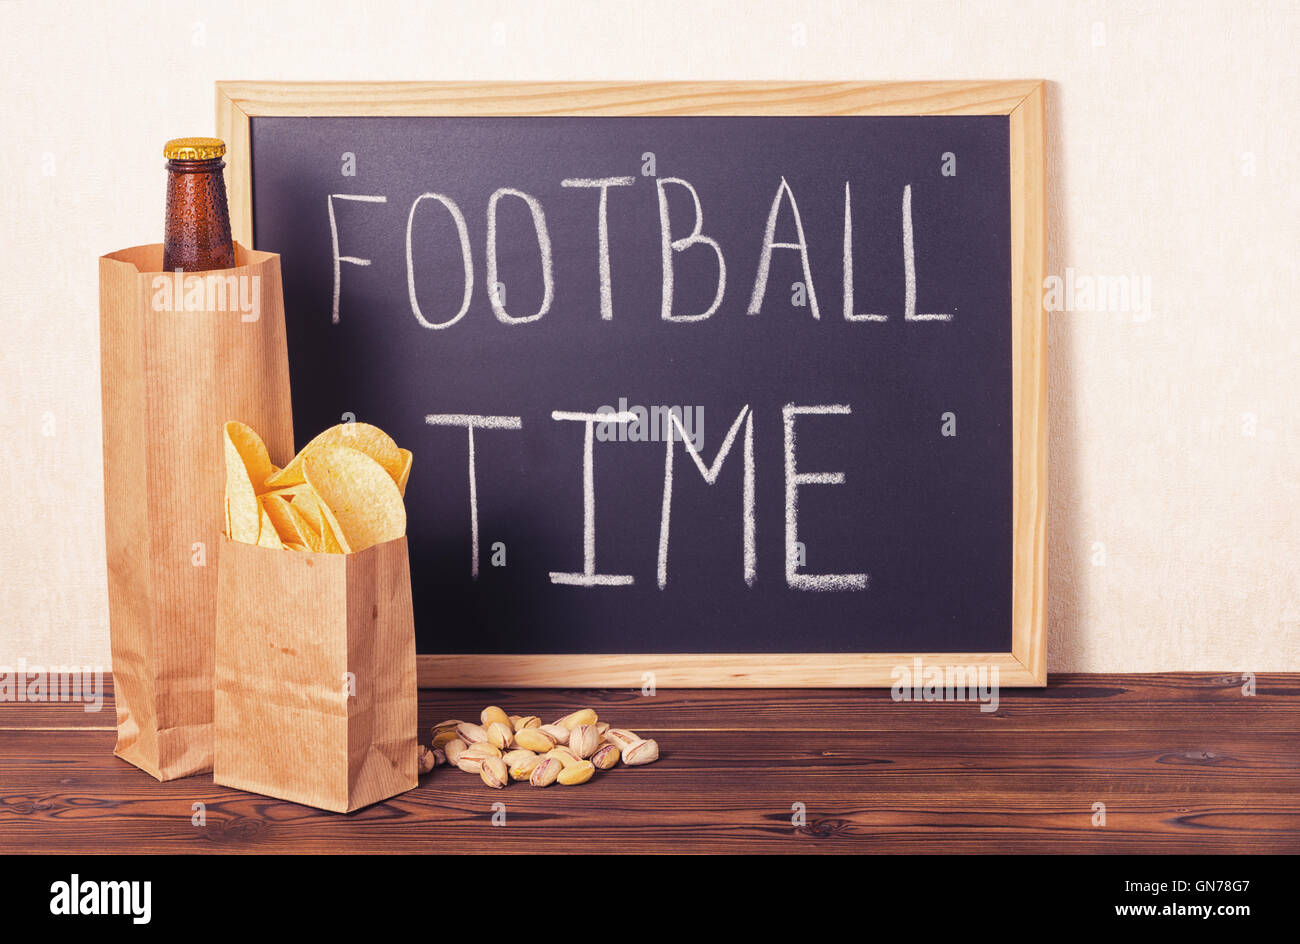 football fans concept of beer bottle in brown paper bag,  chips, pistachio and handwriting text football time written in chalkbo Stock Photo